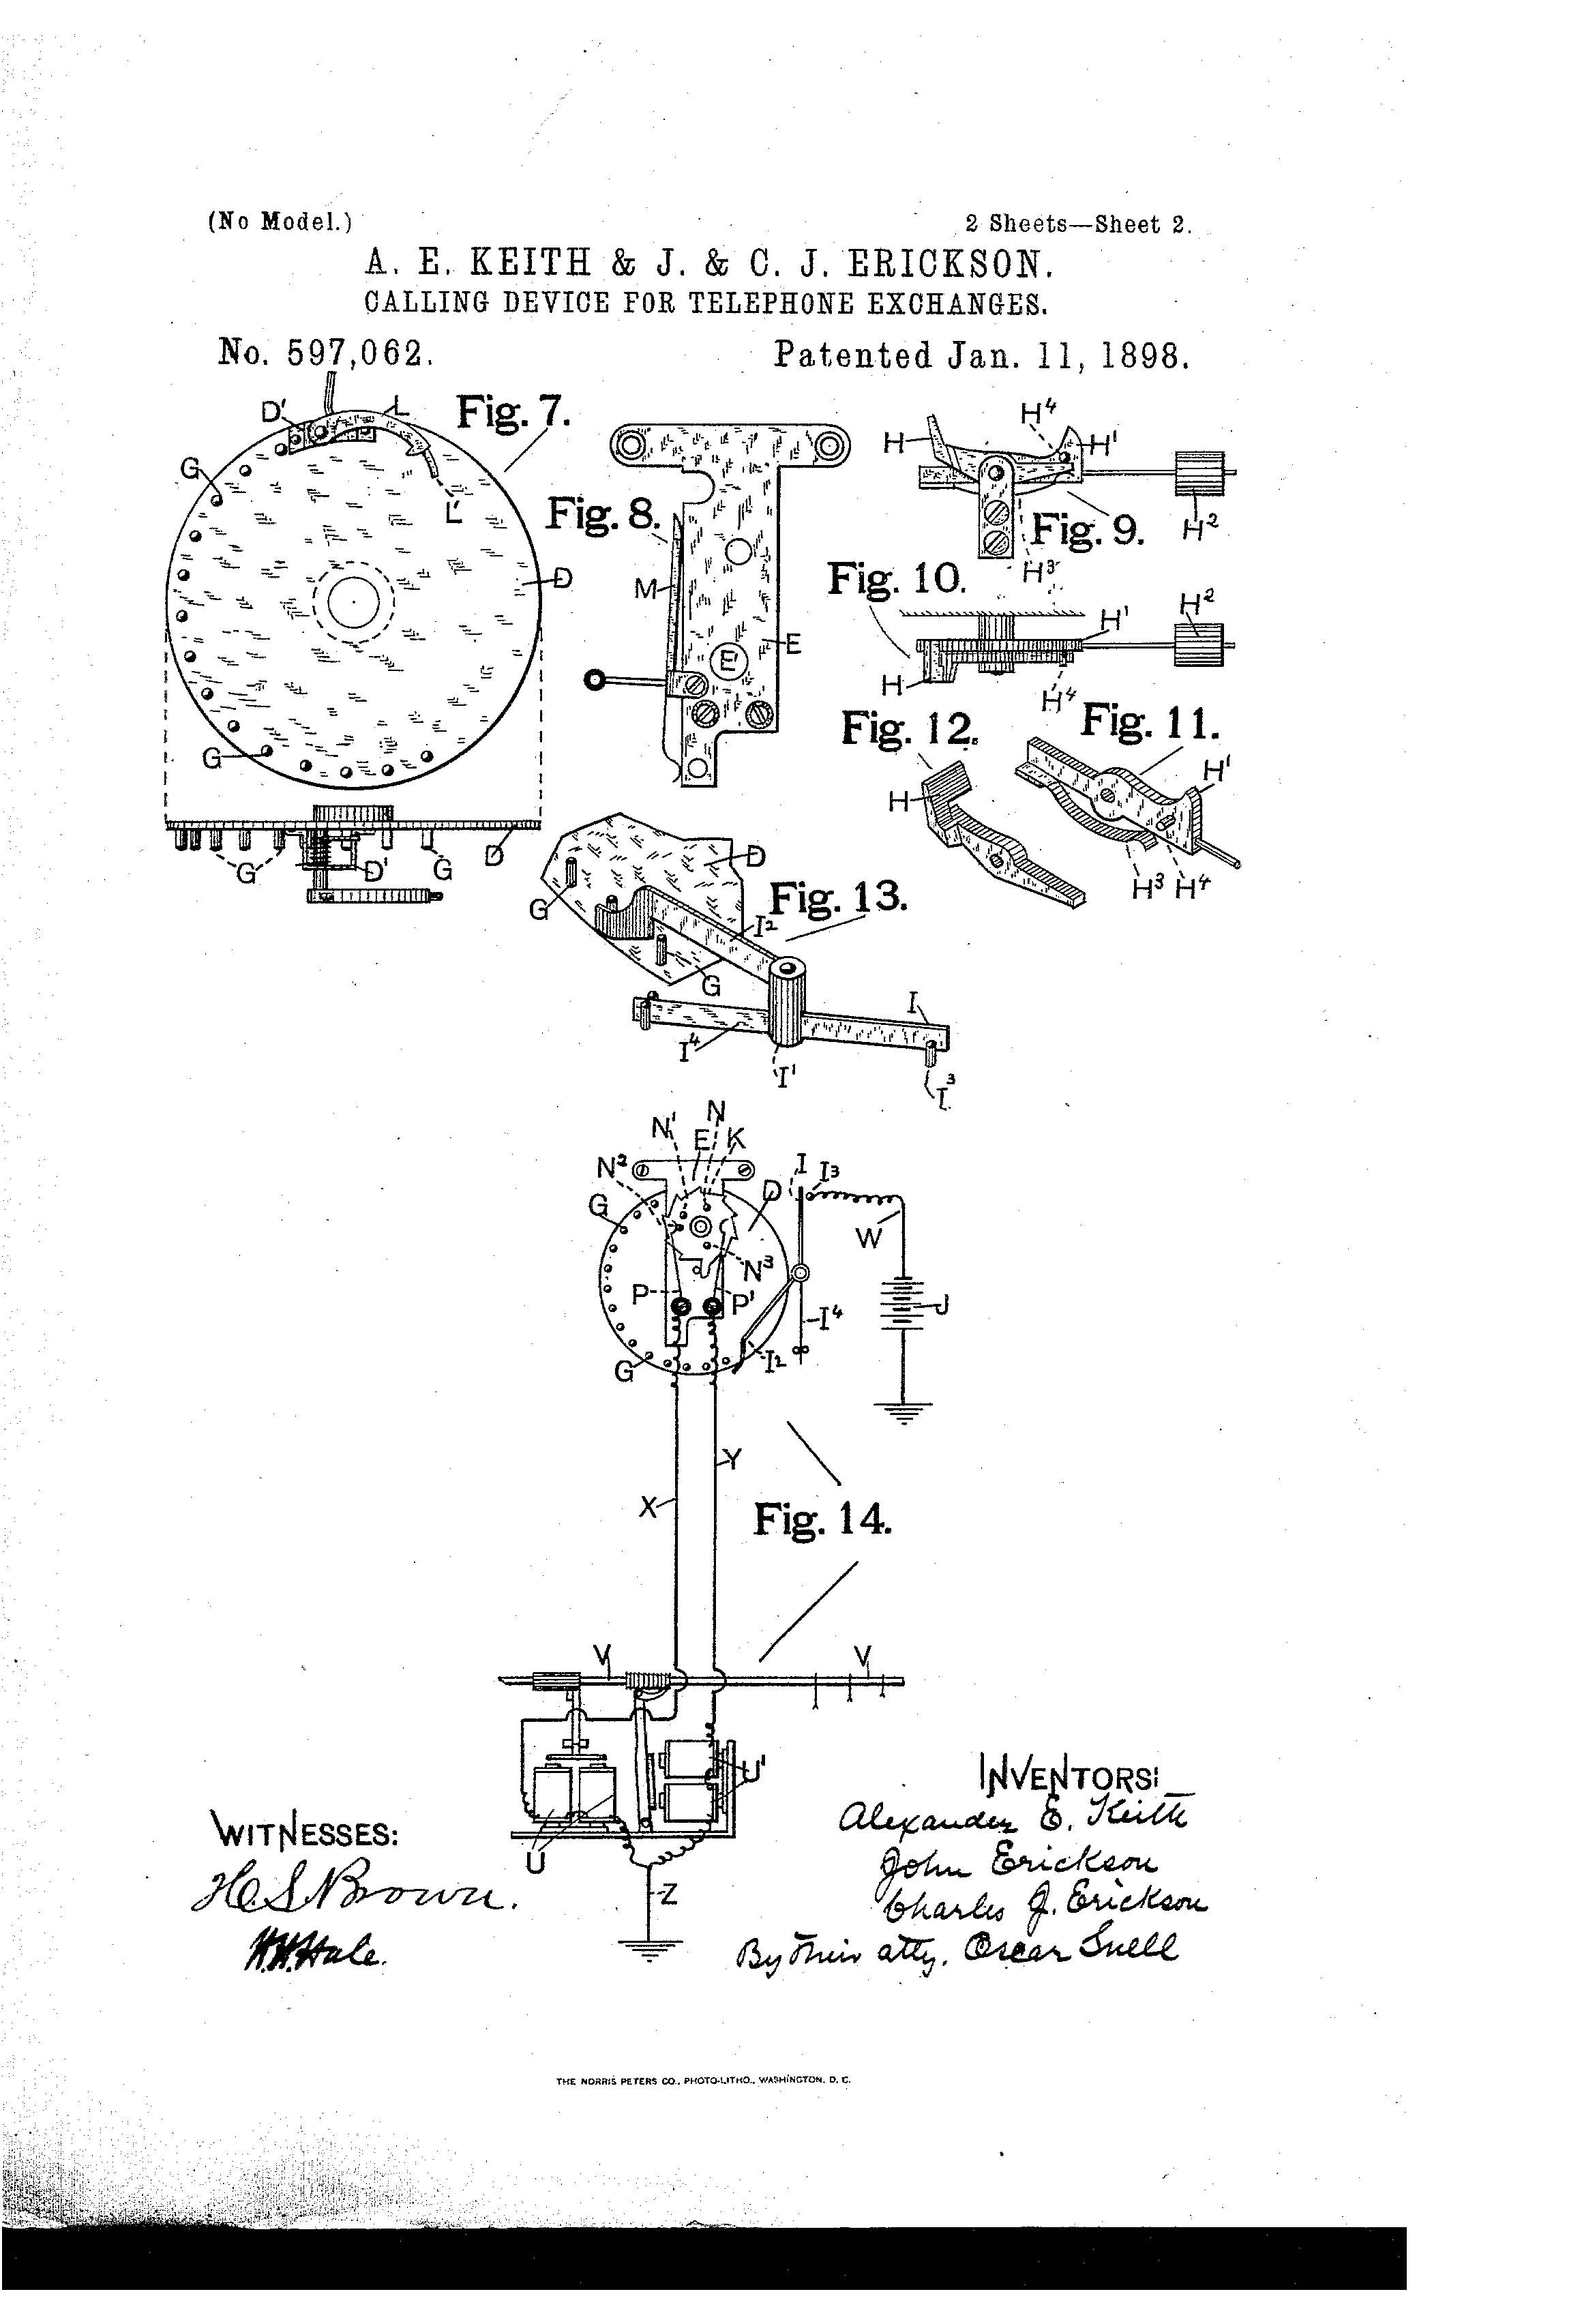 Patent-Illustration-Calling-Device-for-Telephone-Exchanges_Page_2